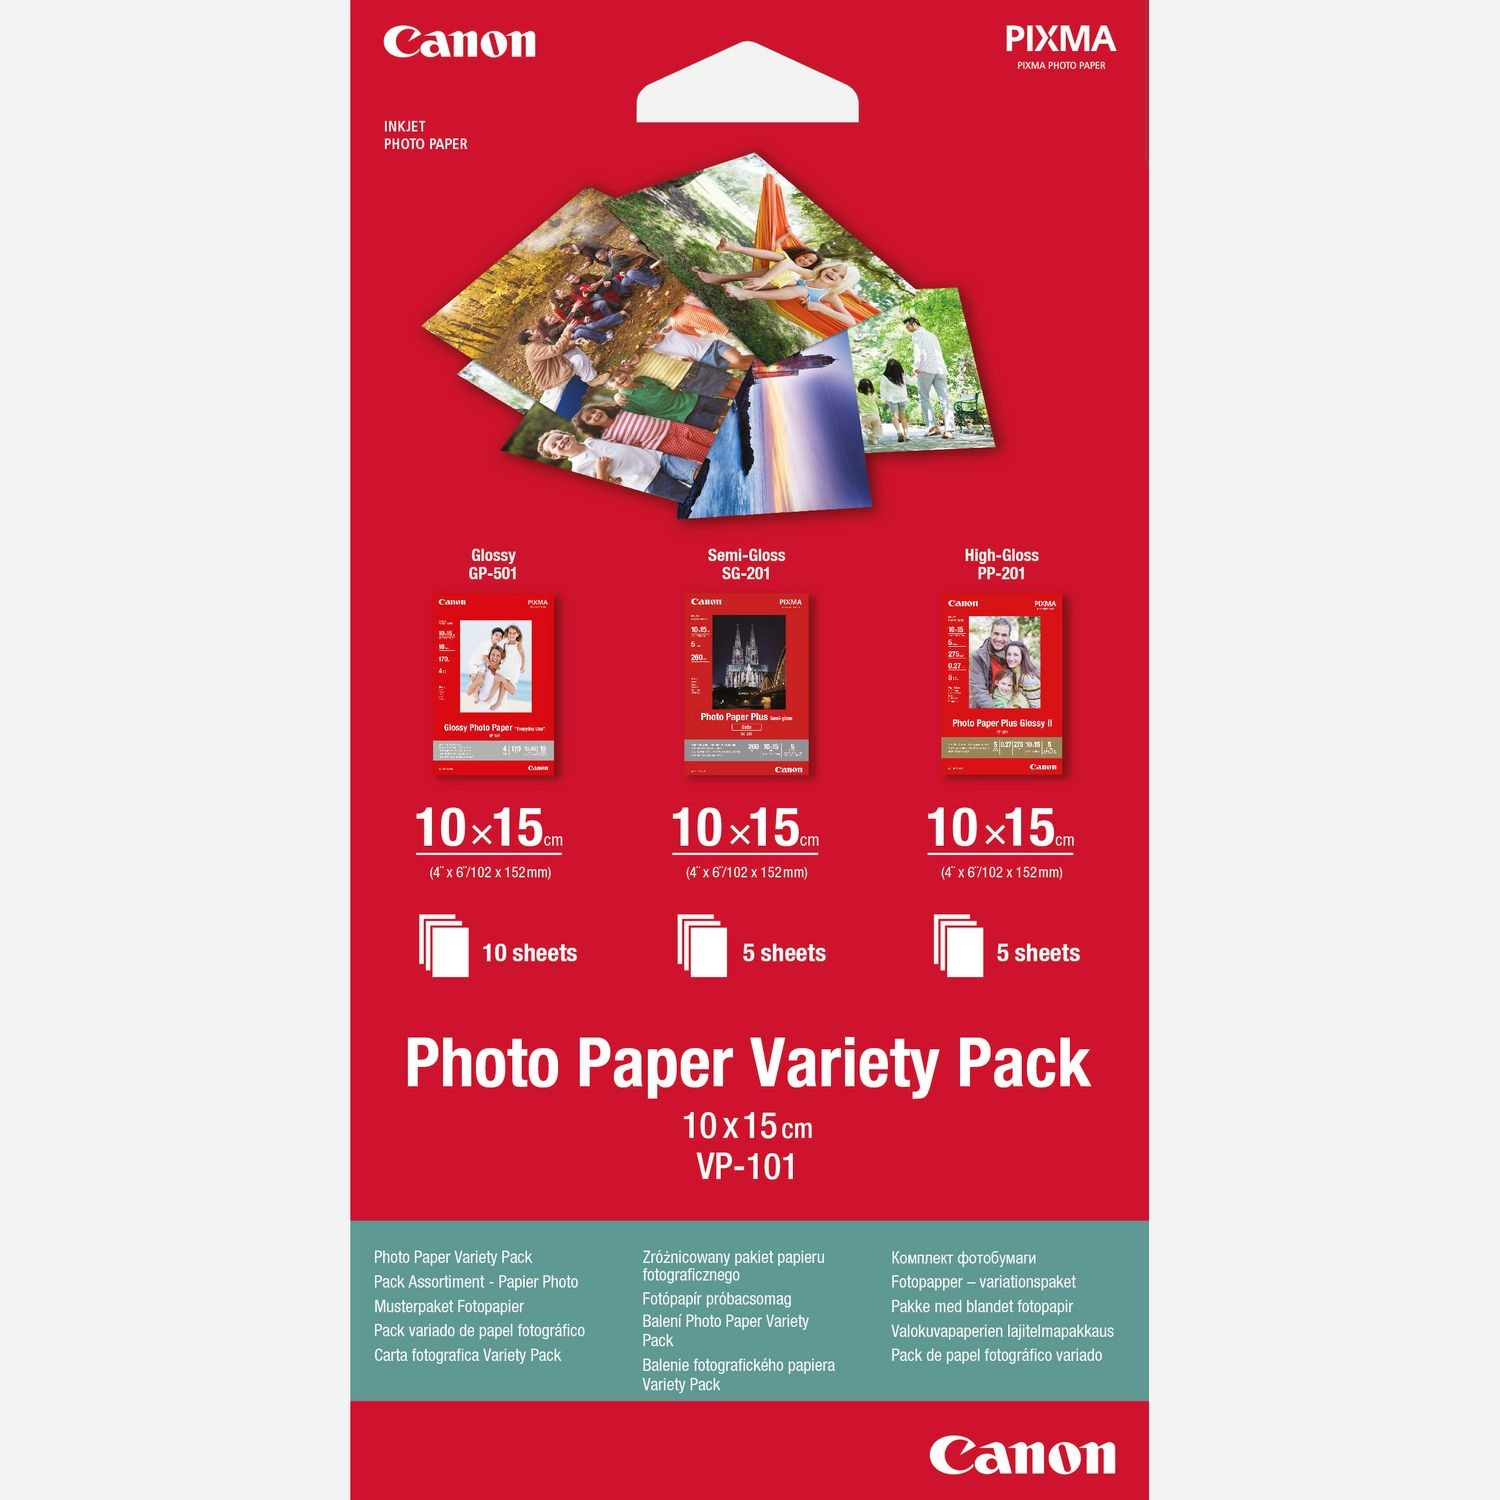 Paper Canon Variety Pack VP101S - Photo Paper Variety Pack 10x15cm VP-101 (20 sheets) (Glossy Photo paper 10x15 (10 sheets) + Semi-Gloss 10x15 (5 sheets) + Glossy II Photo paper 10x15 (5 sheets))